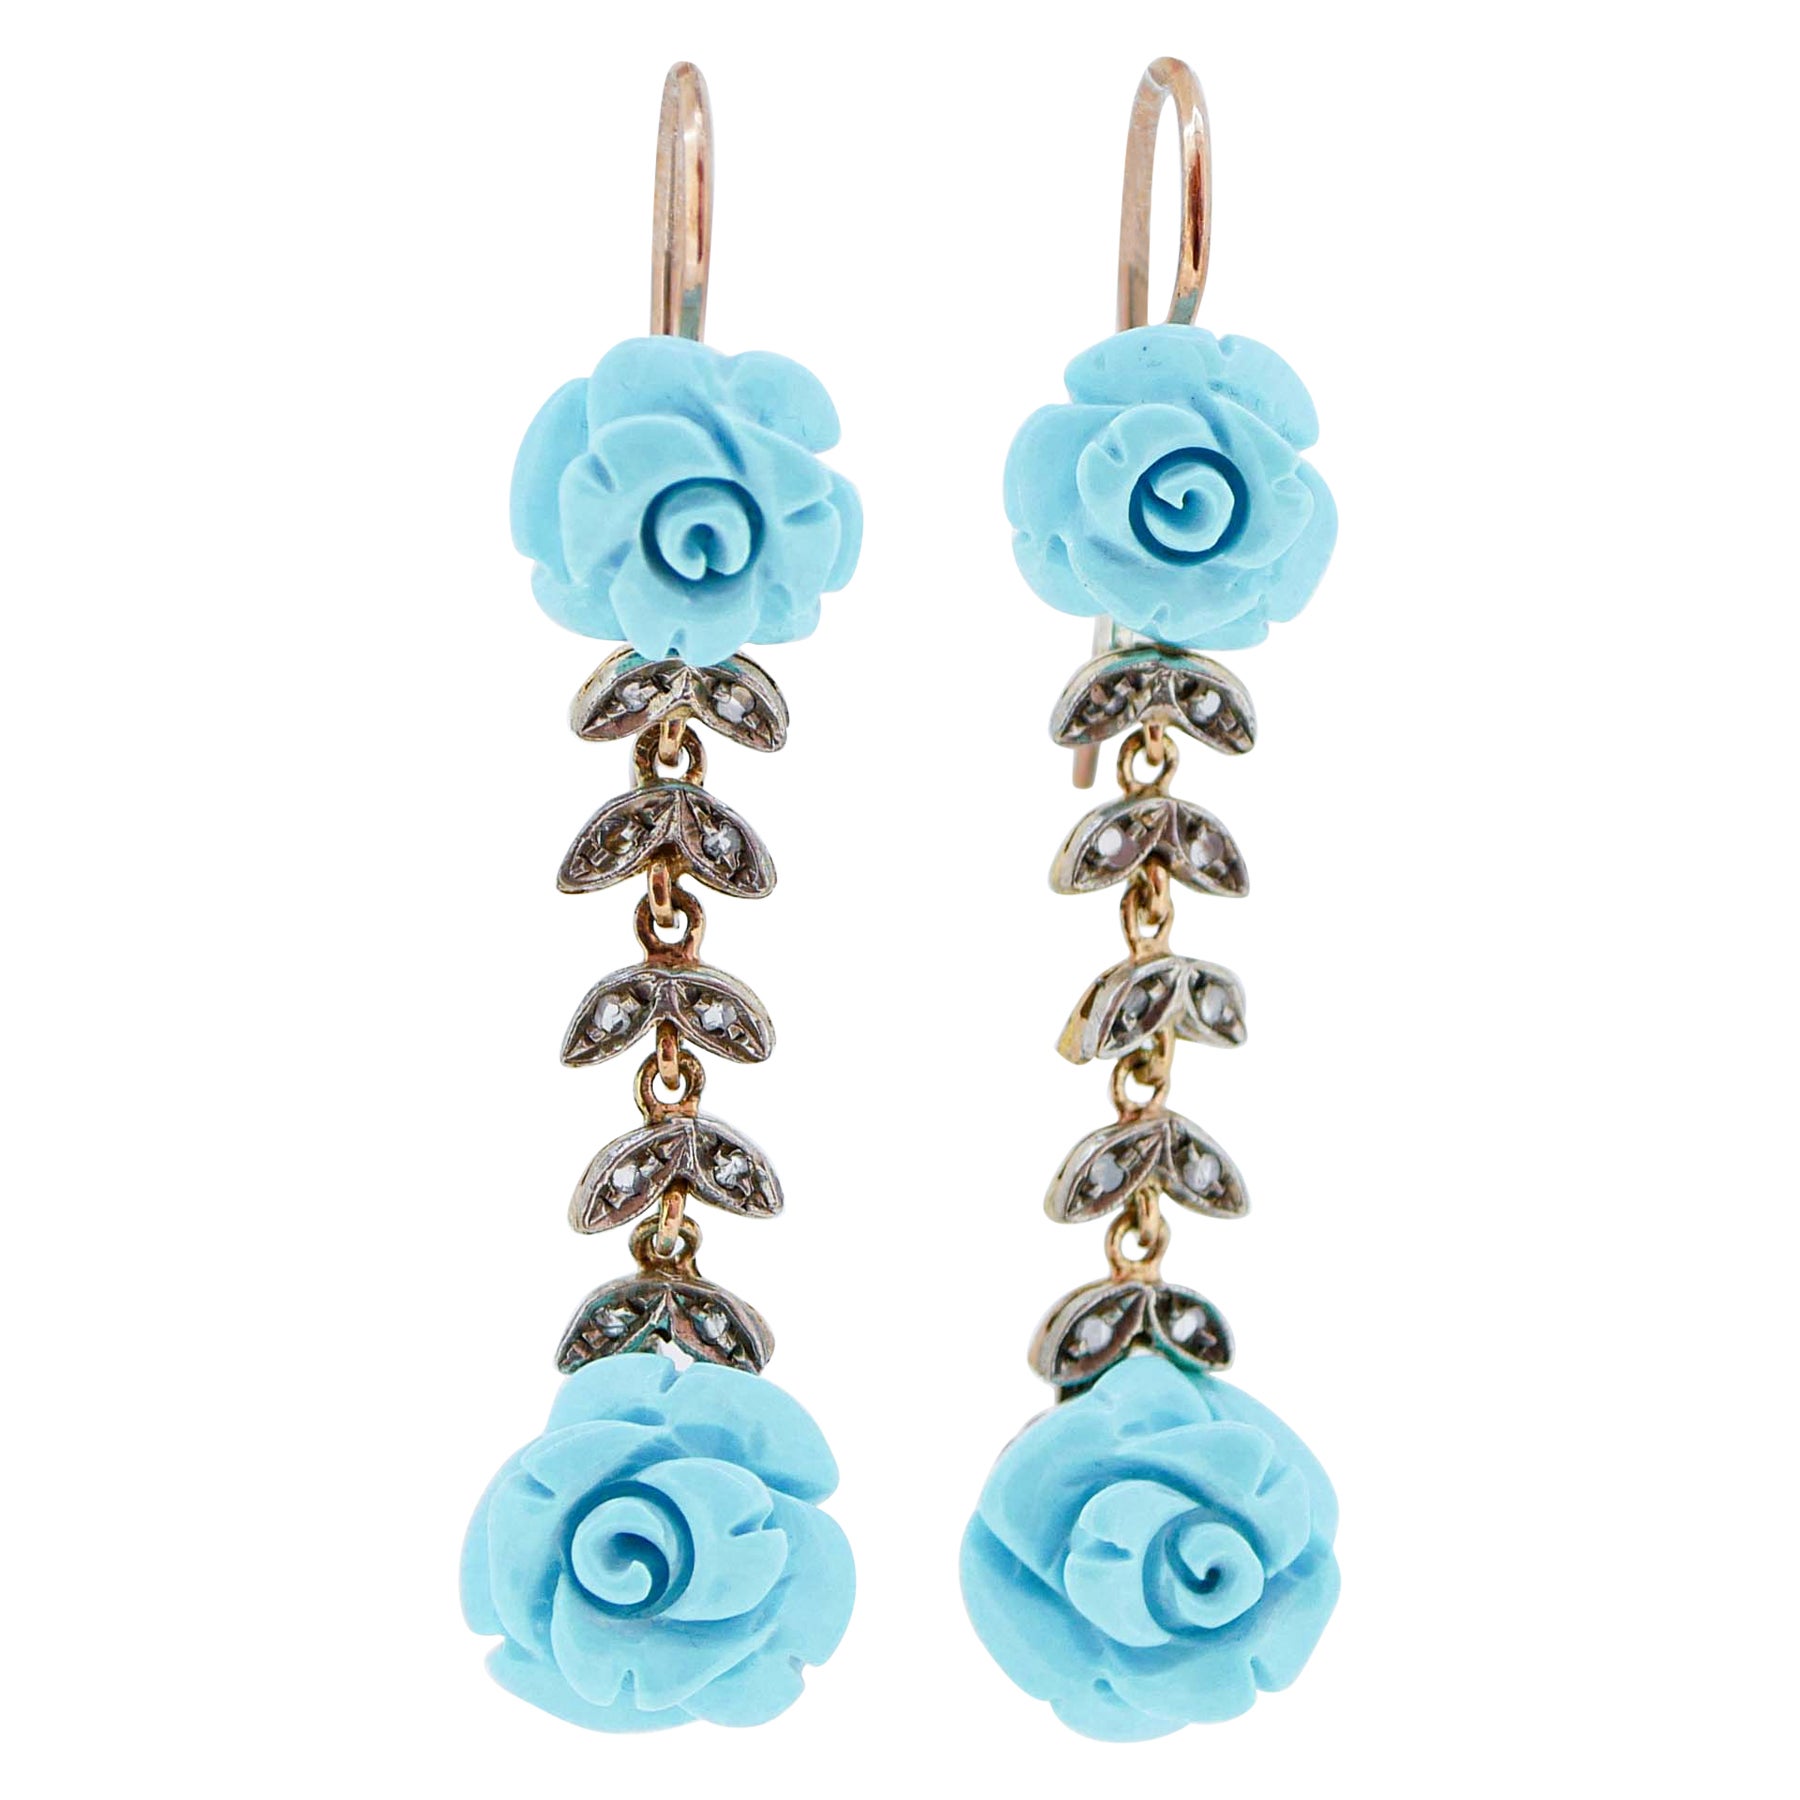 Turquoise, Diamonds, Rose Gold and Silver Retrò Earrings.